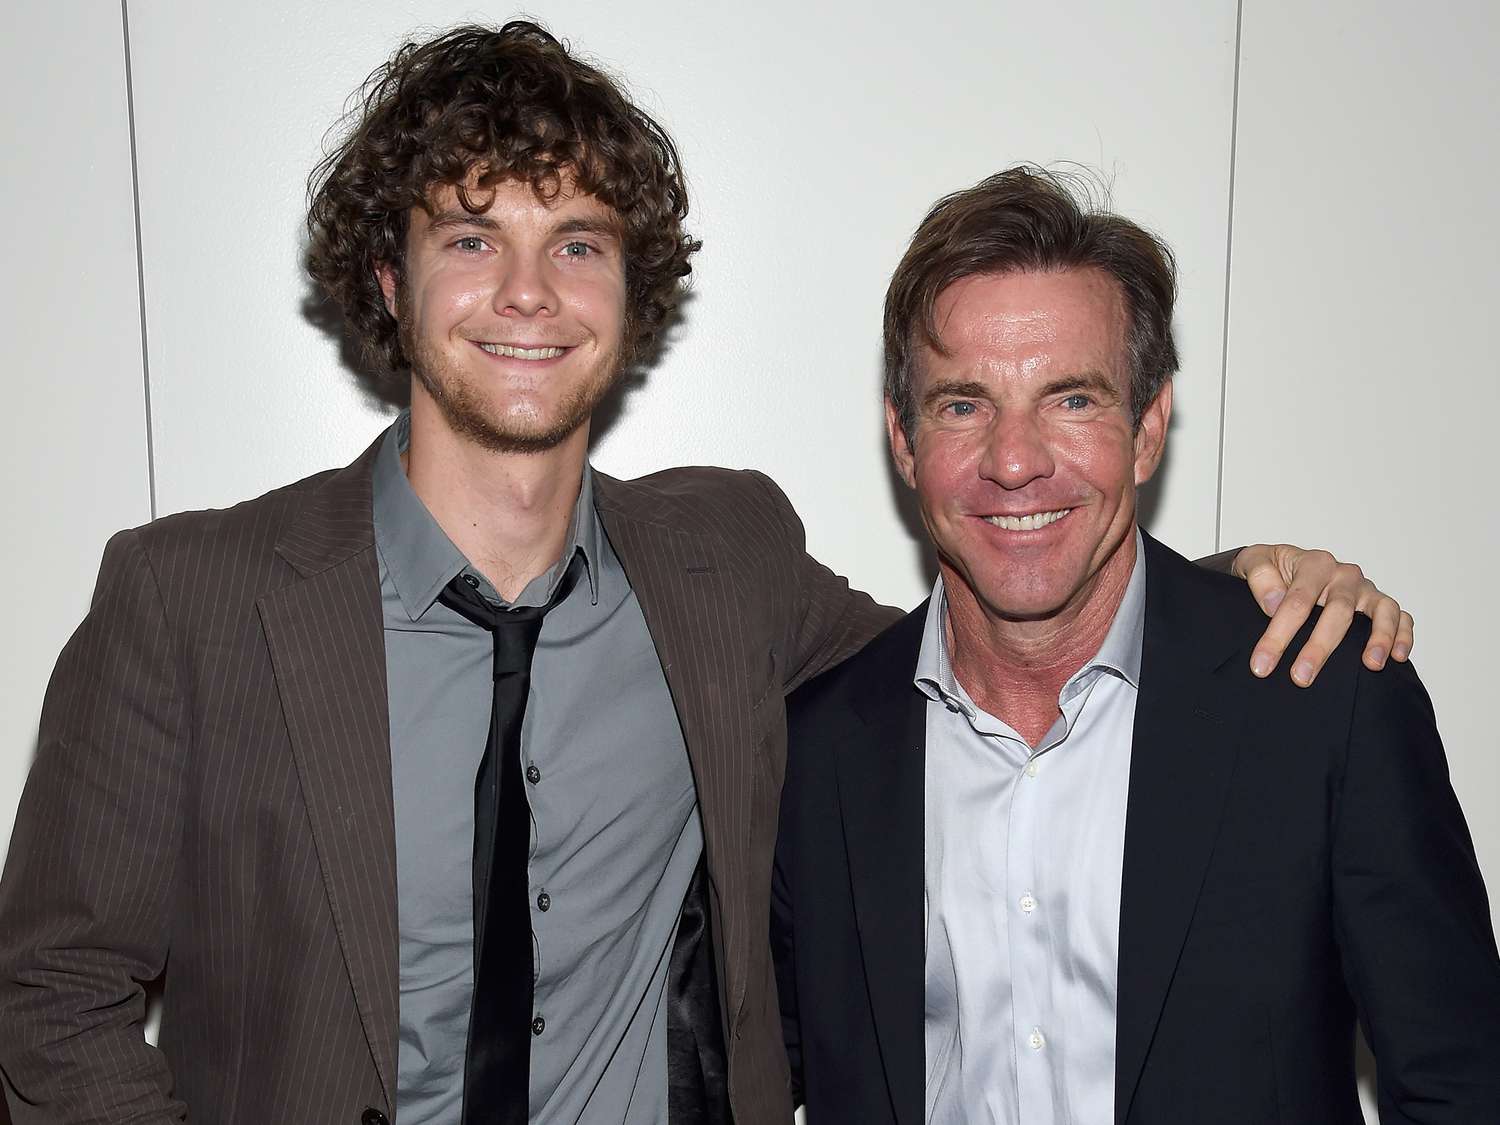 Jack Quaid (L) and Dennis Quaid attend the Armani and Cinema Society Screening of Sony Pictures Classics' "Truth" after party at Armani Ristorante on October 7, 2015 in New York City